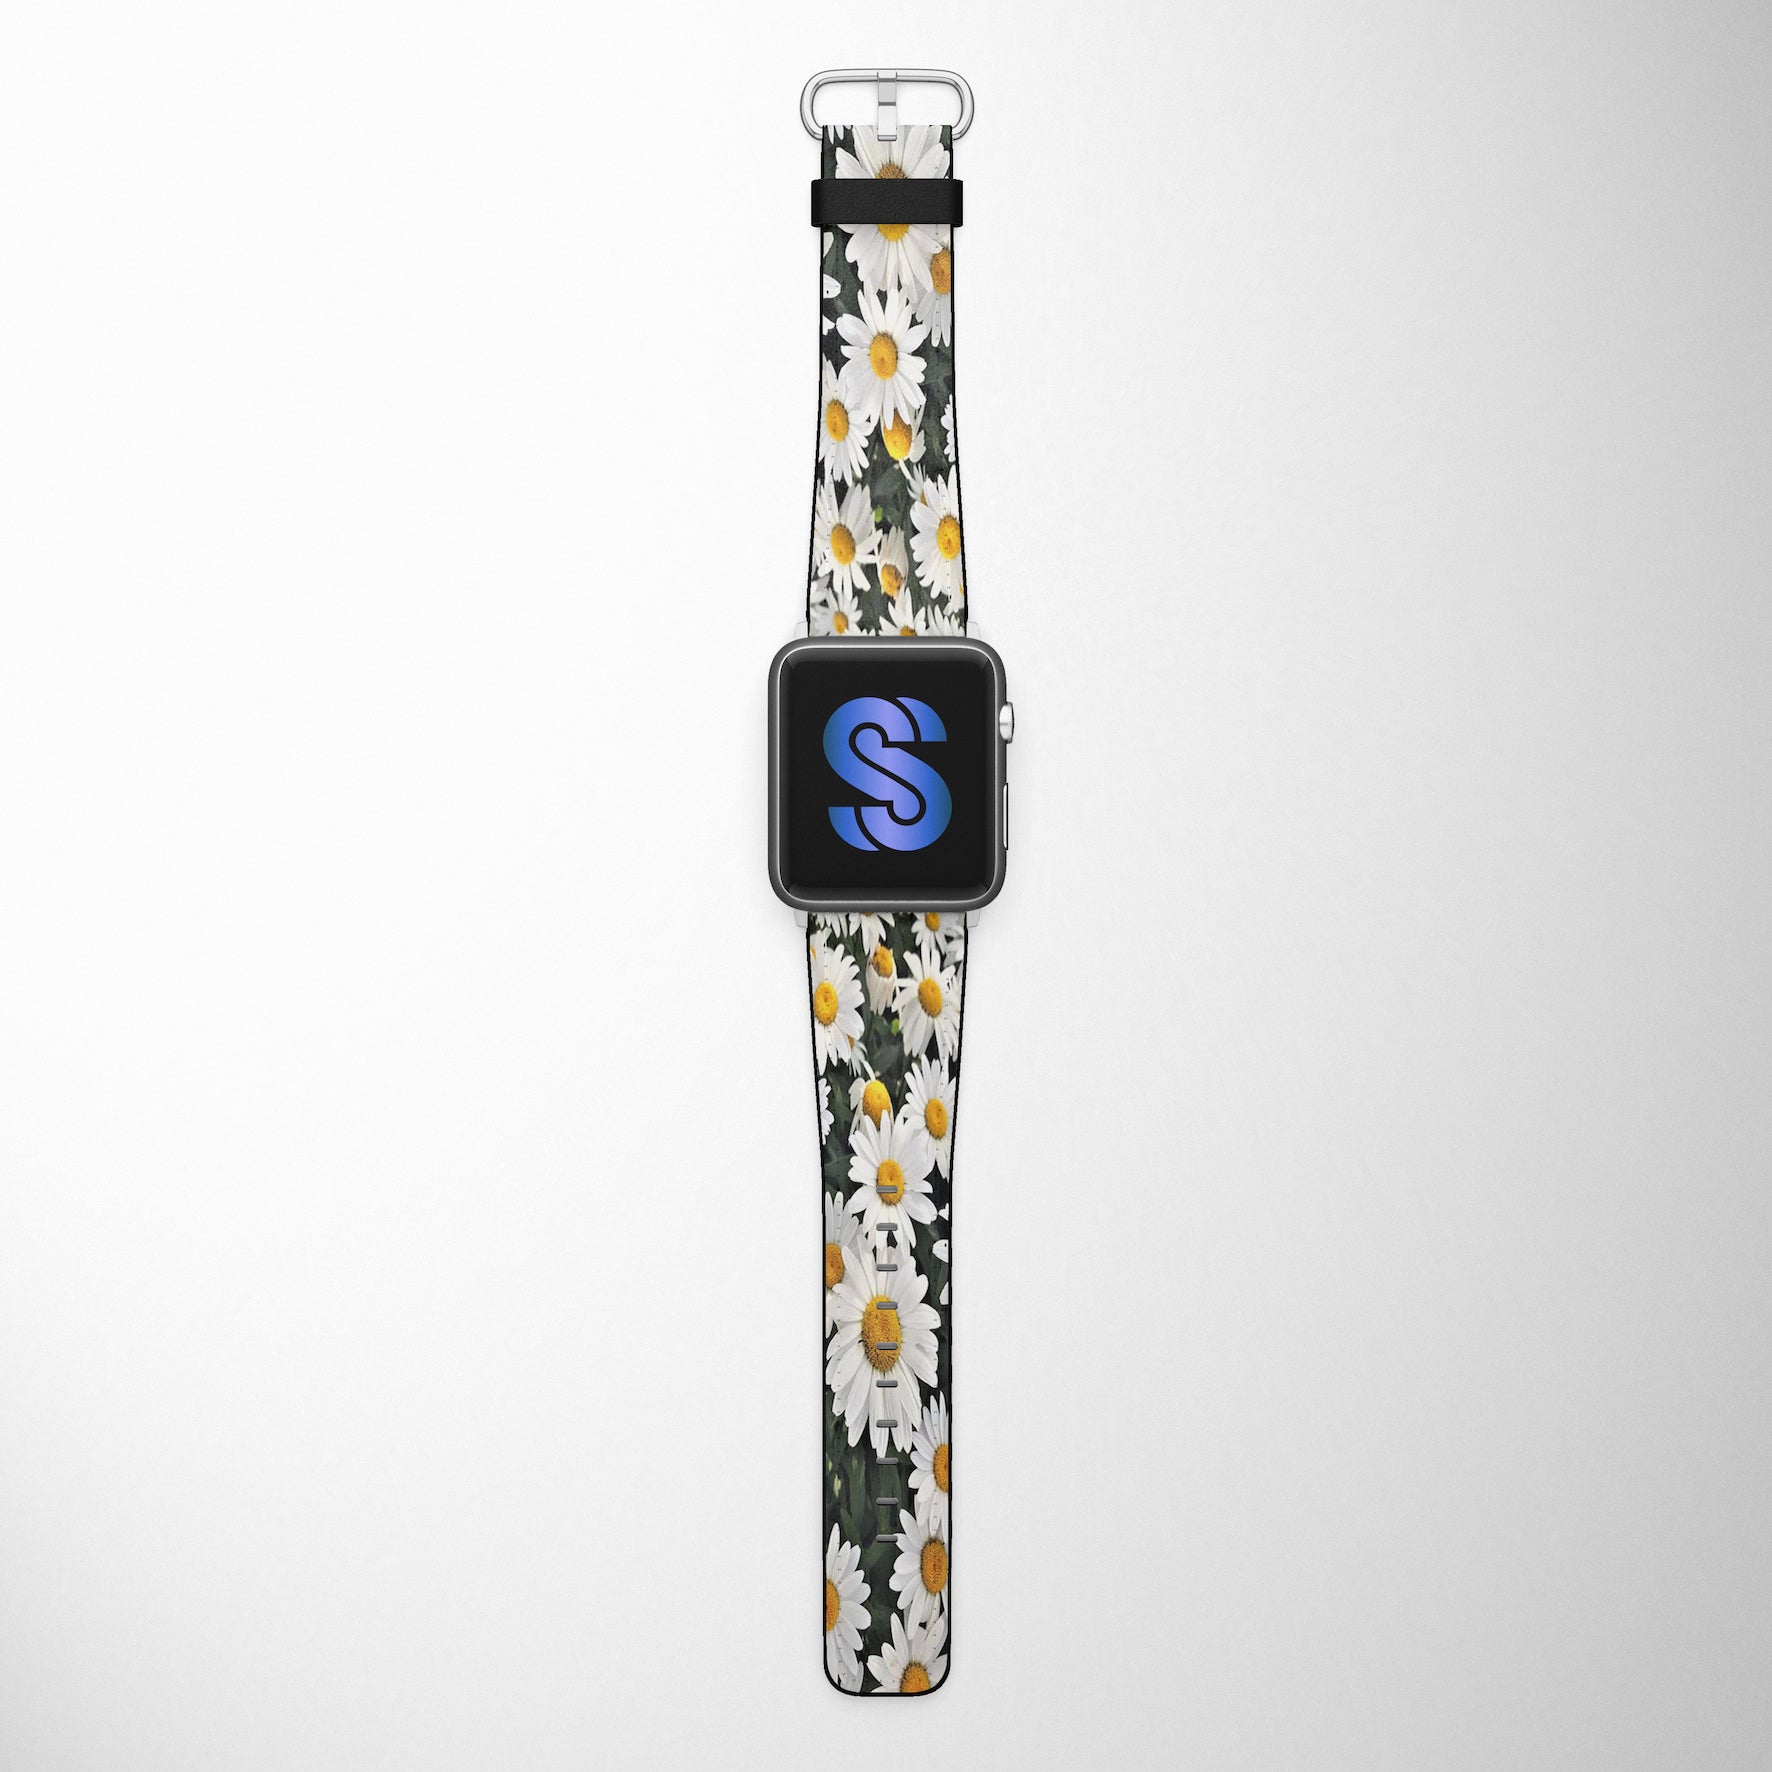 Floral Daisy Faux Leather Apple Watch Band for Apple Watch 1,2,3,4,5,6,SE - www.scottsy.com